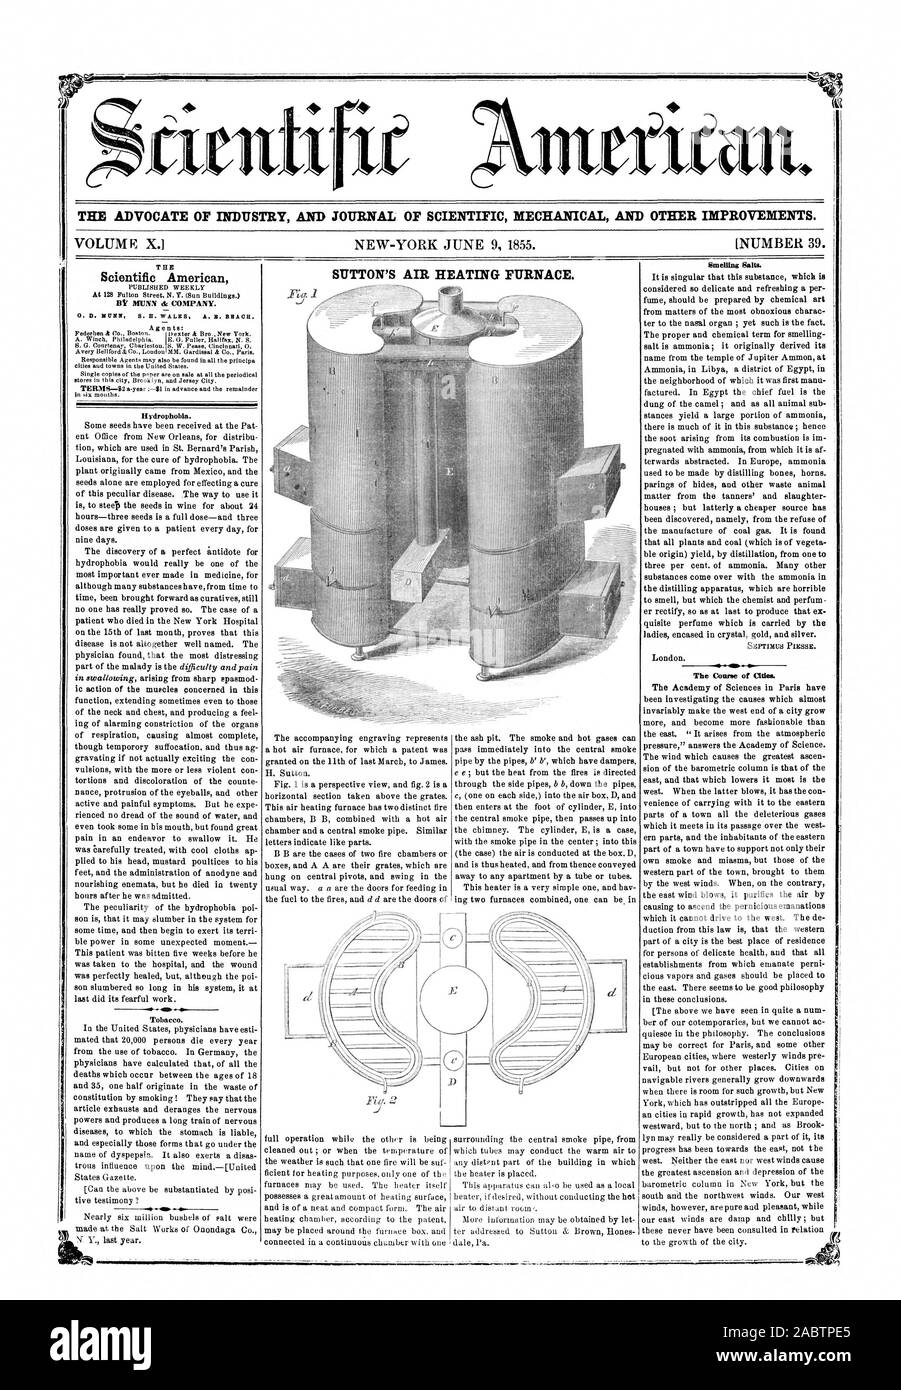 THE ADVOCATE OF INDUSTRY AND JOURNAL OF SCIENTIFIC MECHANICAL AND OTHER IMPROVEMENTS. SUTTON'S AIR HEATING FURNACE. THE BY MUNN dr COMPANY. Hydrophobia. Some seeds have been received at the Pat ent Office from New Orleans for distribu tion which are used in St. Bernard's Parish Louisiana for the cure of hydrophobia. The plant originally came from Mexic and the seeds alone are employed for effecting a cure of this peculiar disease. The way to use it is to steel) the seeds in wine for about 24 hours—three seeds is a full dose—and three doses are given to a patient every day for nine days. The Stock Photo